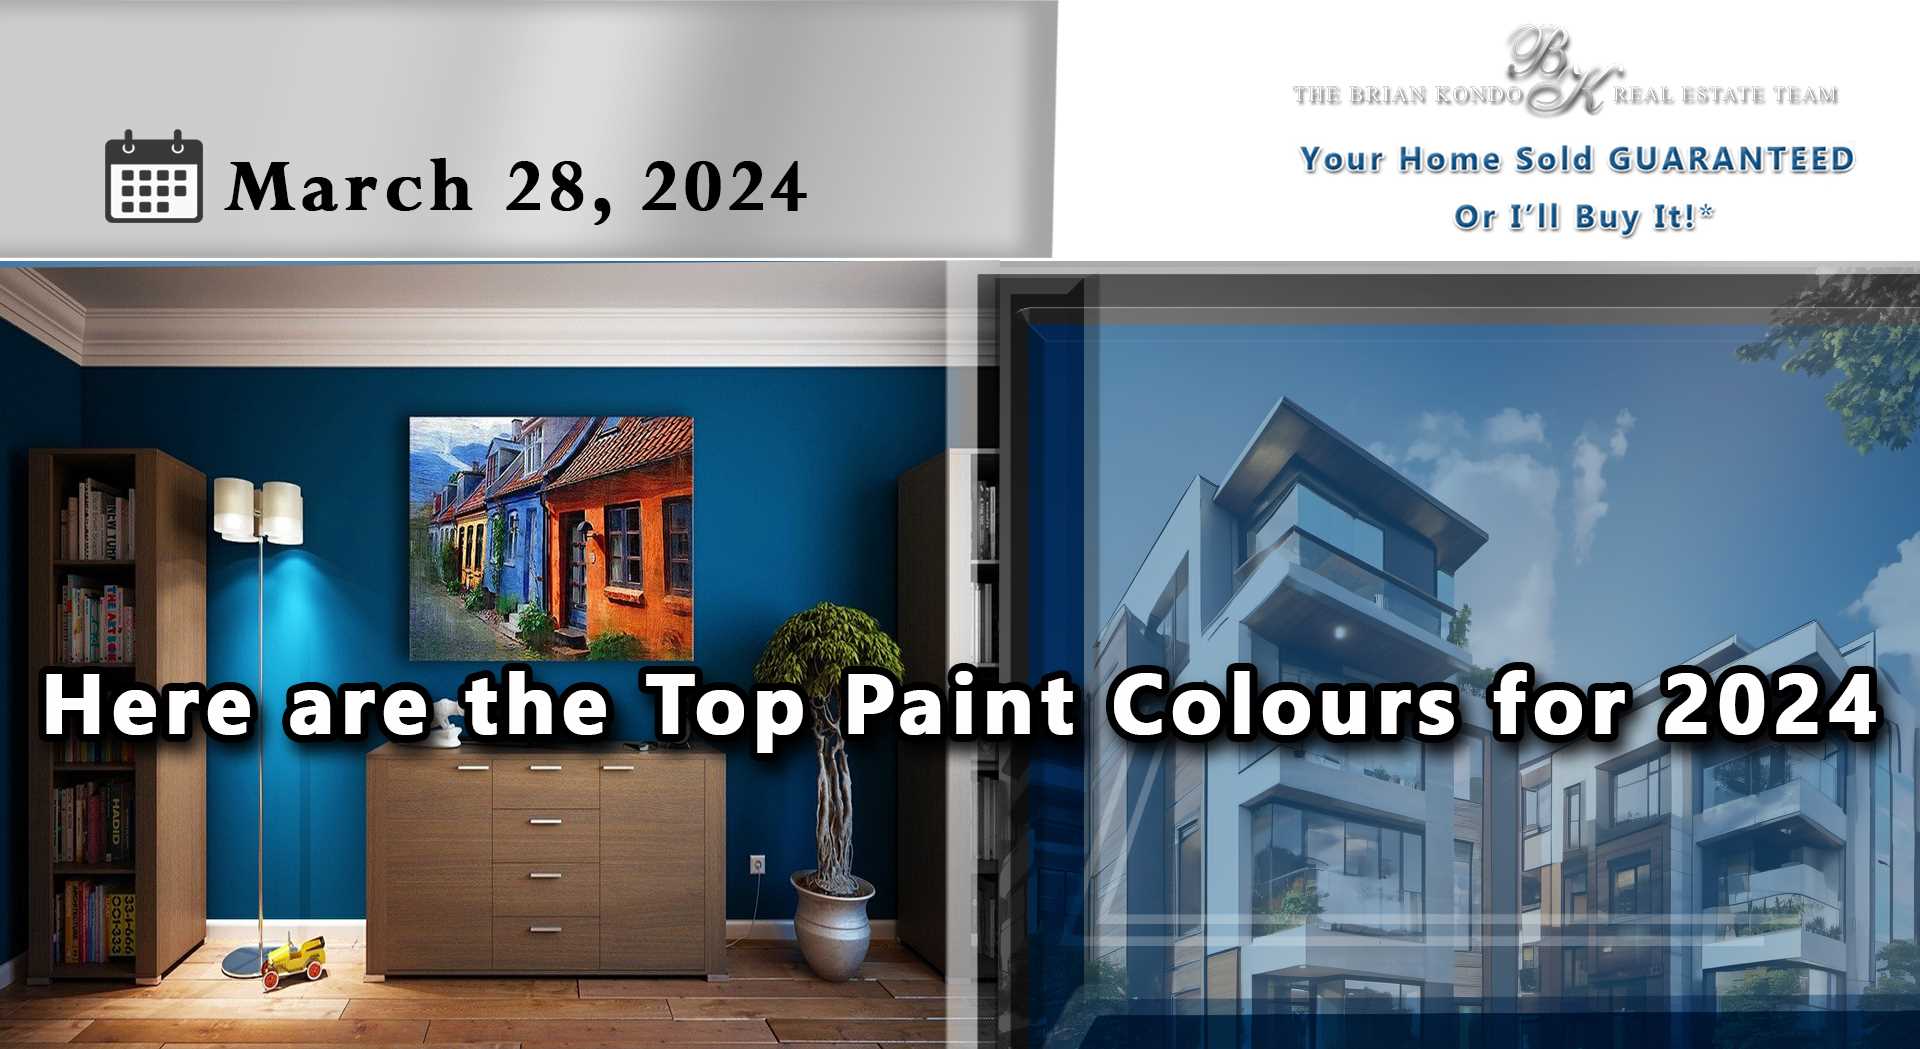 Here are the Top Paint Colours for 2024